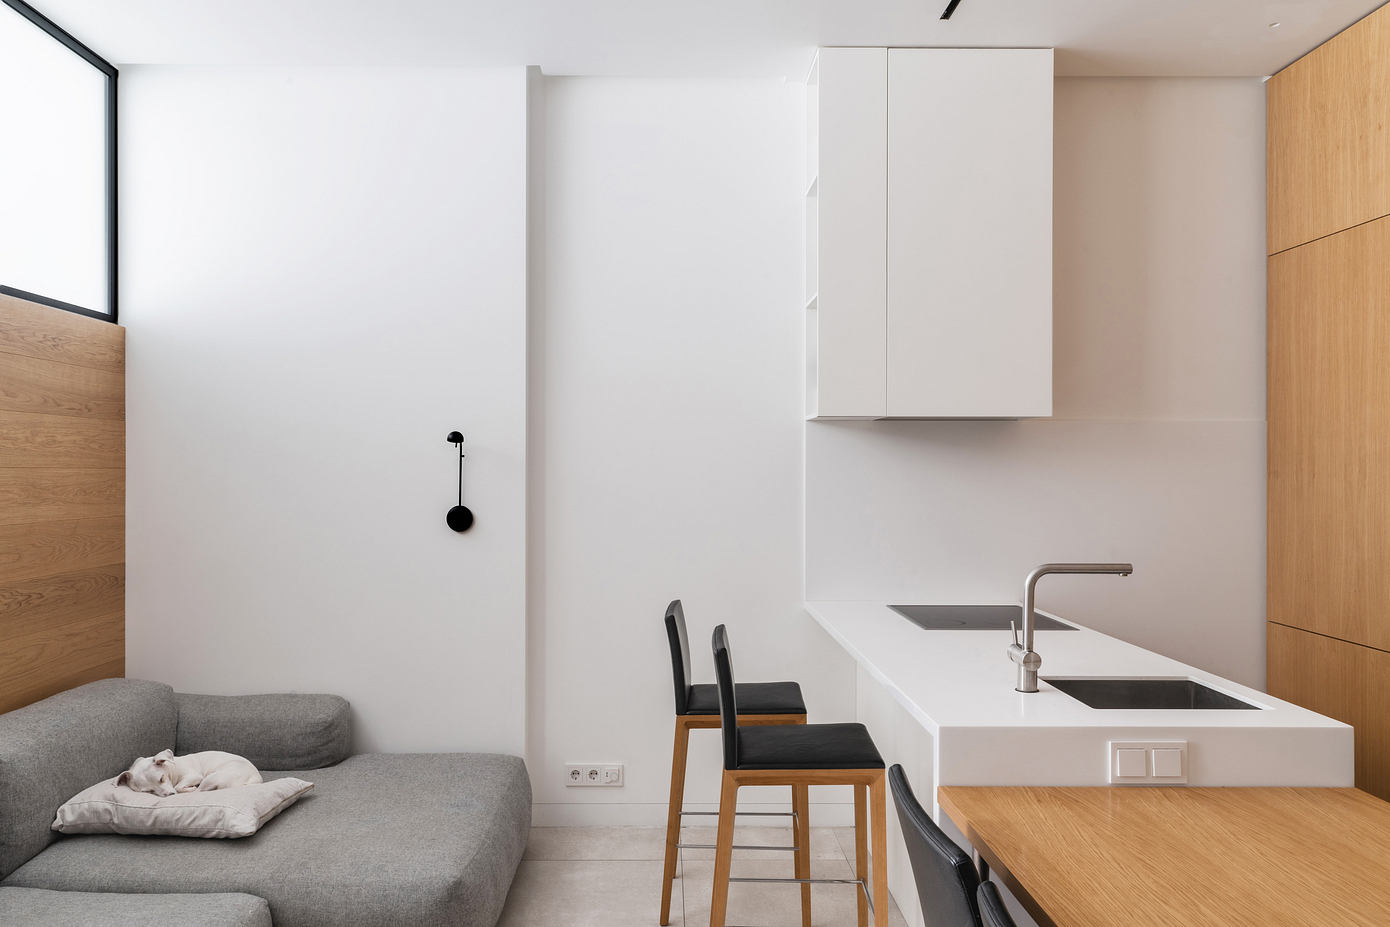 Subbota Apartment: Minimalist and Multifunctional Design in Moscow